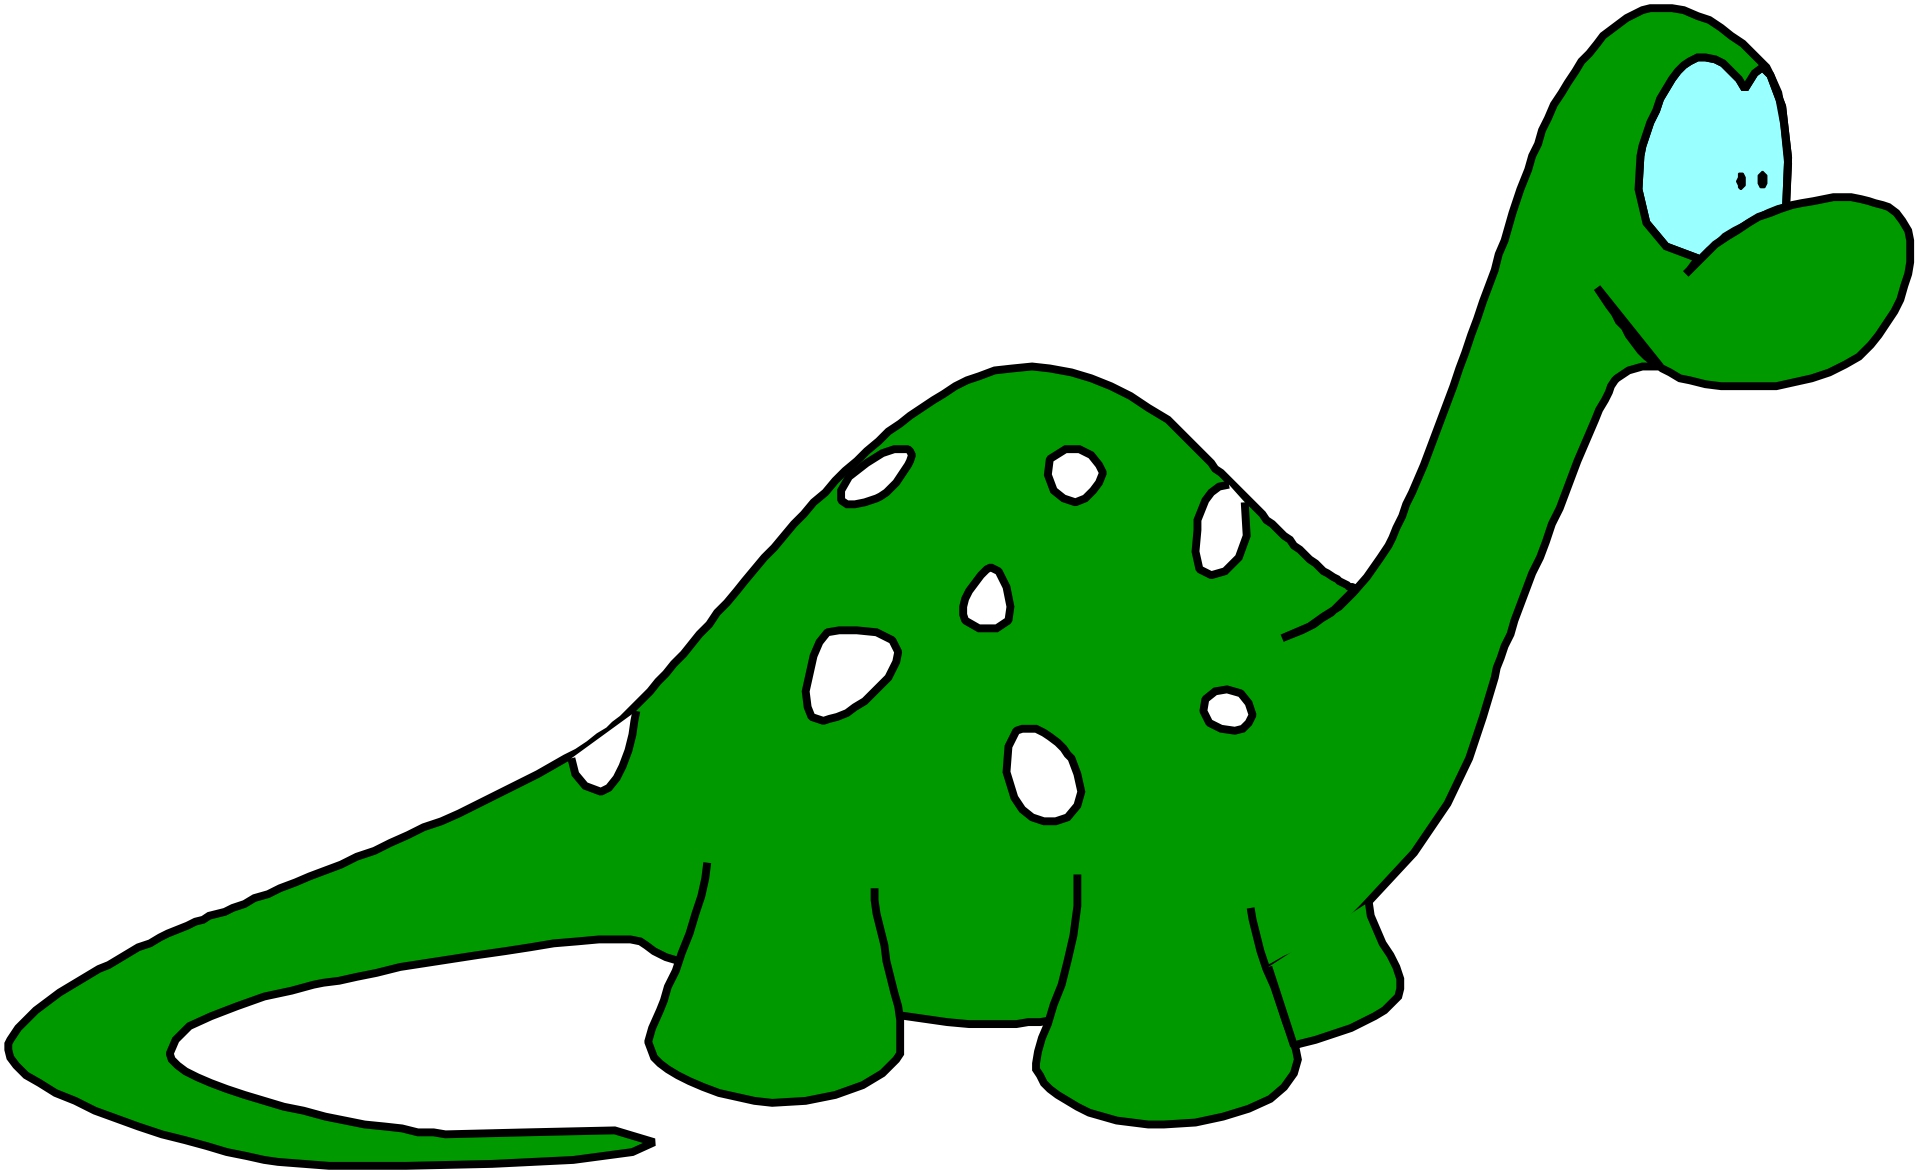 Free Dinosaur Cartoon Images, Download Free Dinosaur Cartoon Images png  images, Free ClipArts on Clipart Library